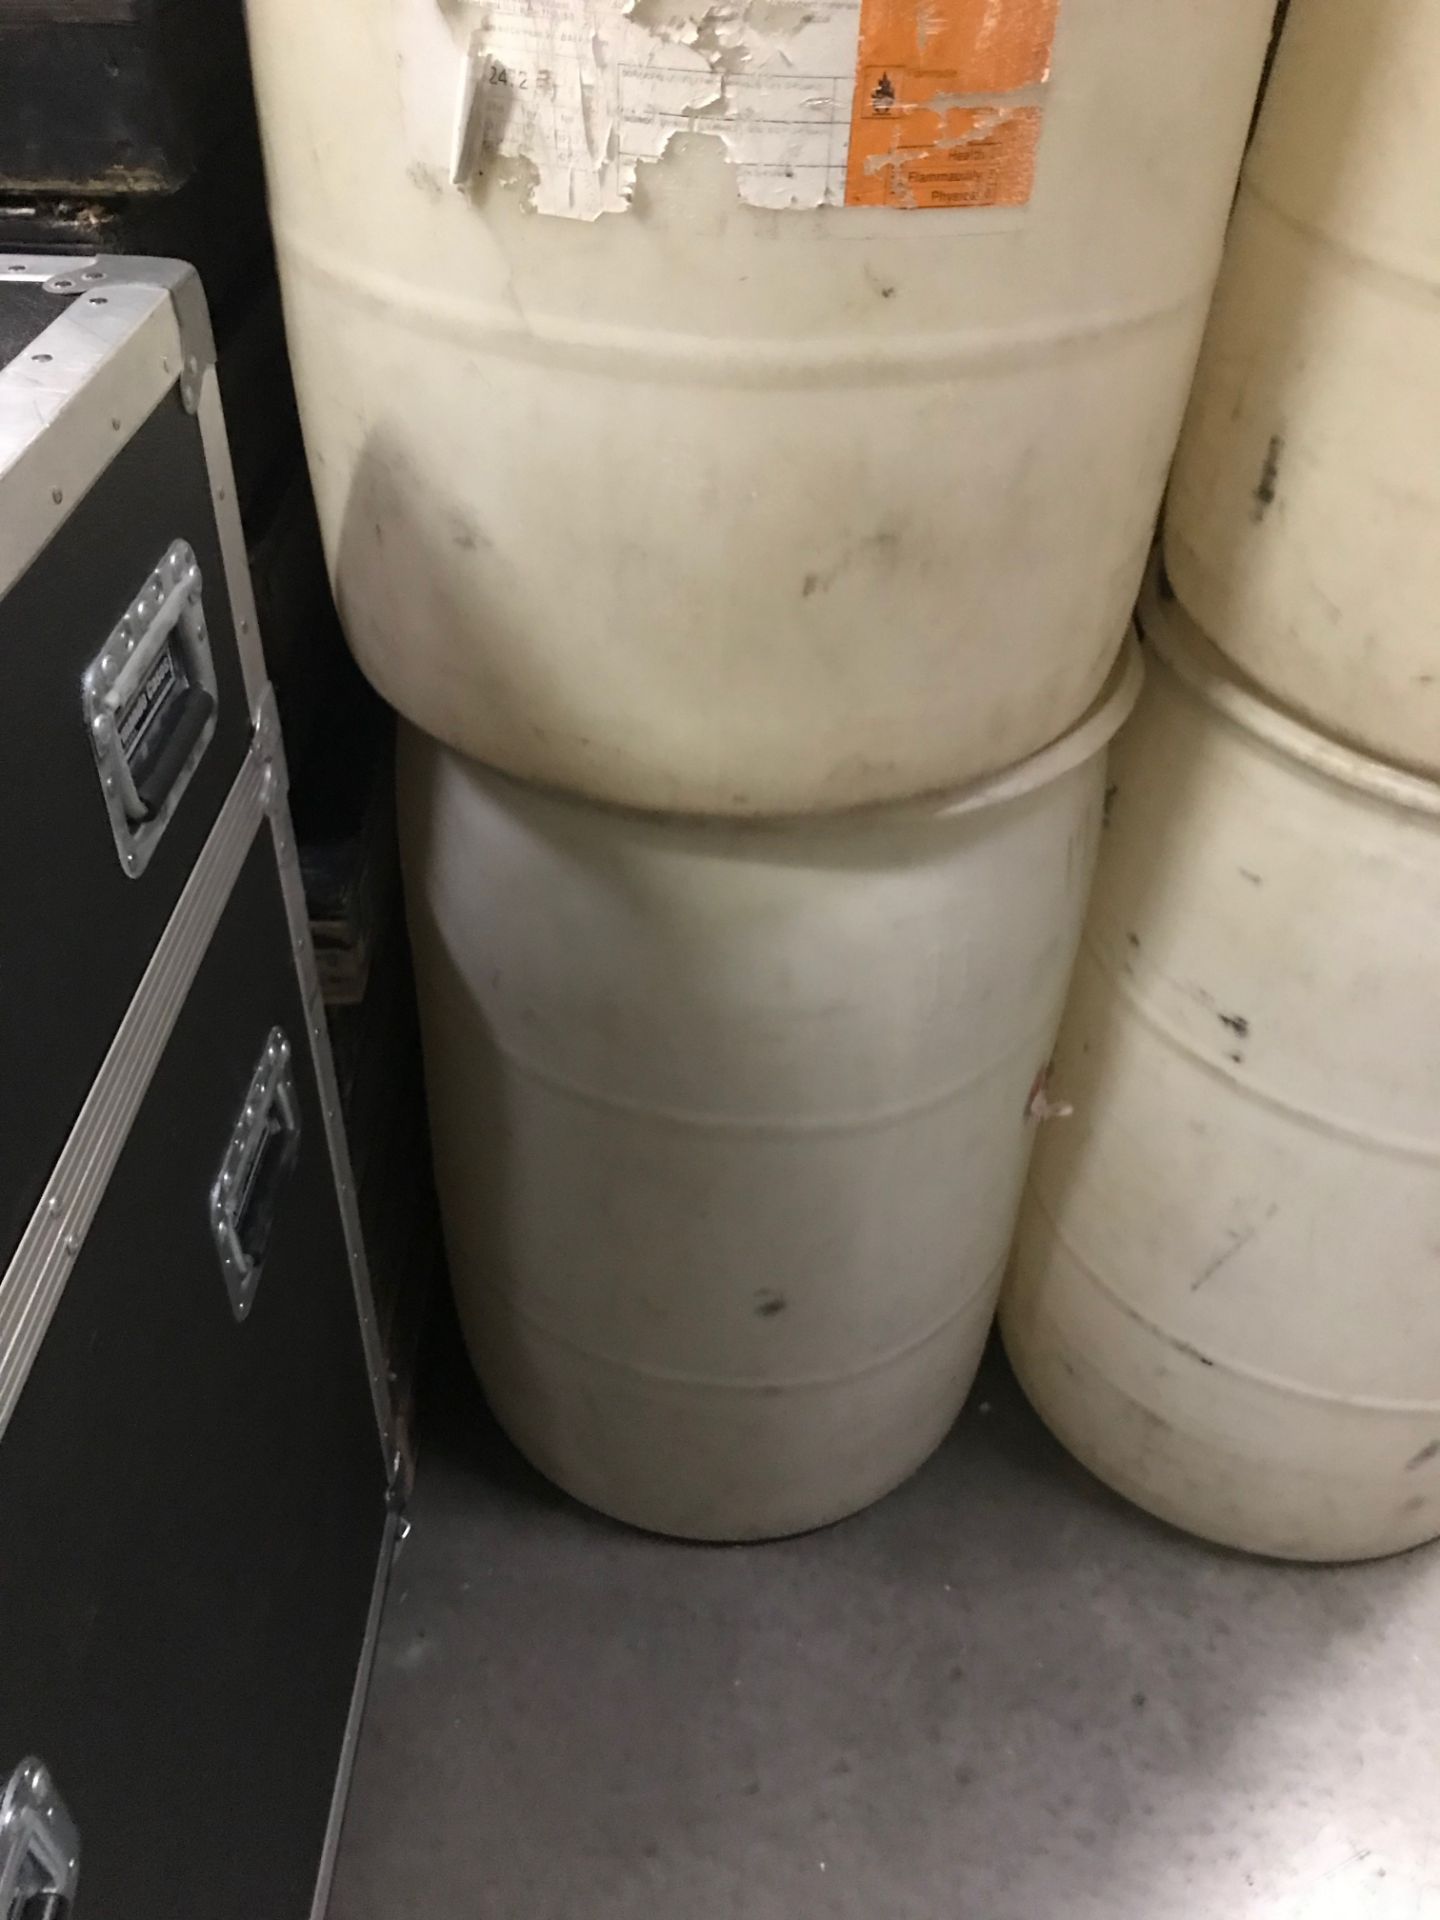 LOT OF: (4) 55 GALLON DRUMS W/ LIDS (USED FOR WATER WEIGHTS FOR RIGGING) - Image 4 of 4